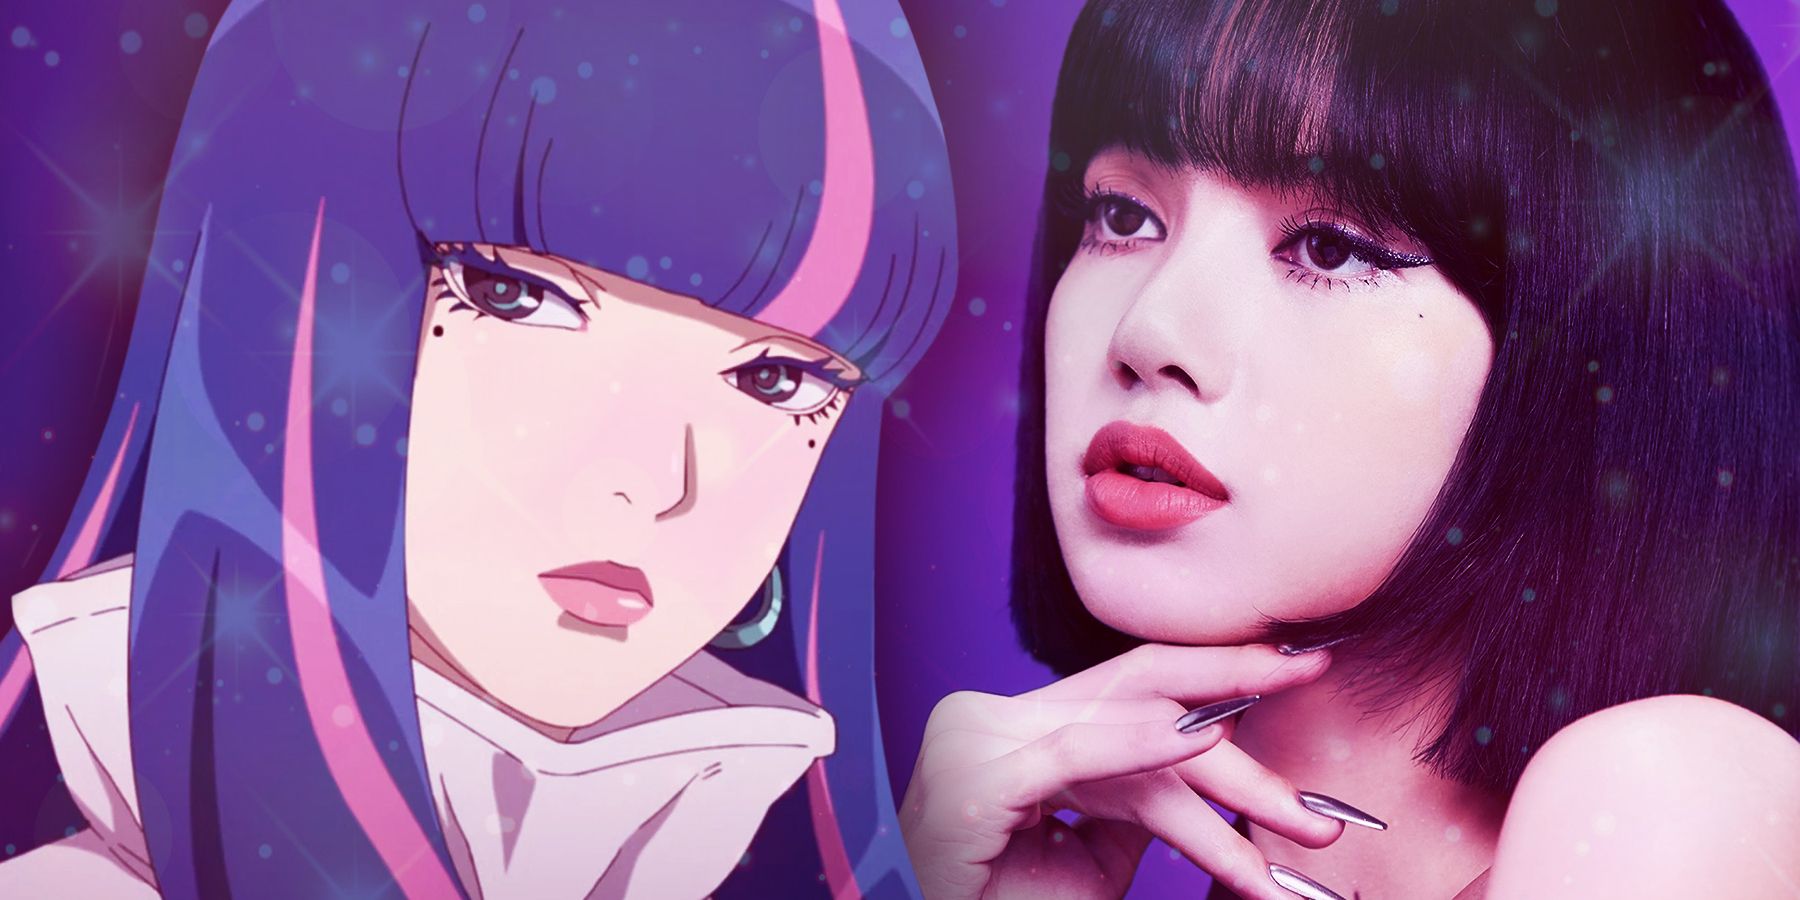 On the right, Eida from 'Boruto: Naruto Next Generation' and left, Lisa of South Korean band BLACKPINK.